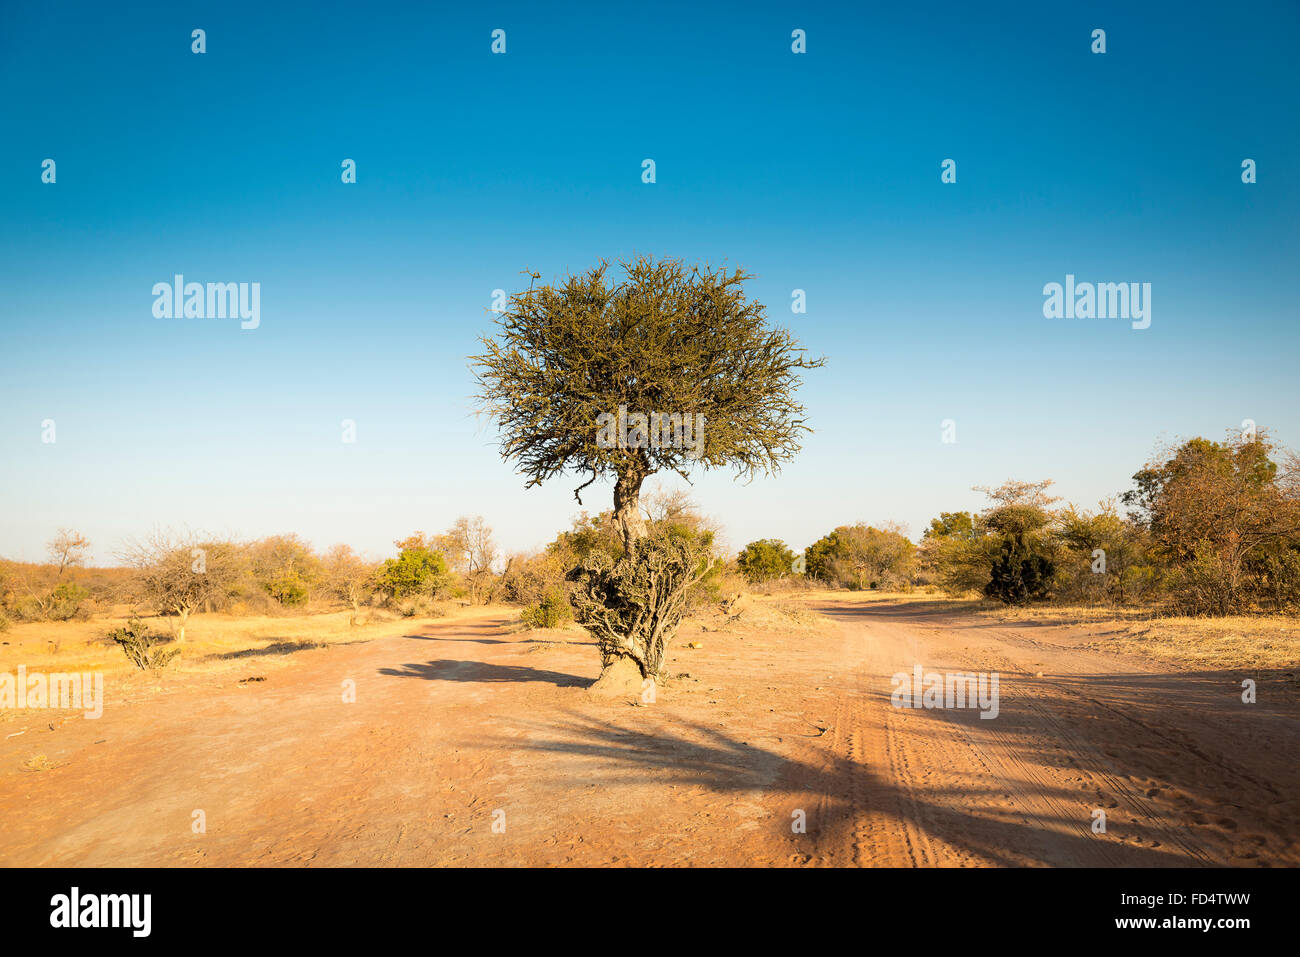 The classic African Acacia tree, a symbol of Africa, grows wild in the dry Botswana landscape Stock Photo